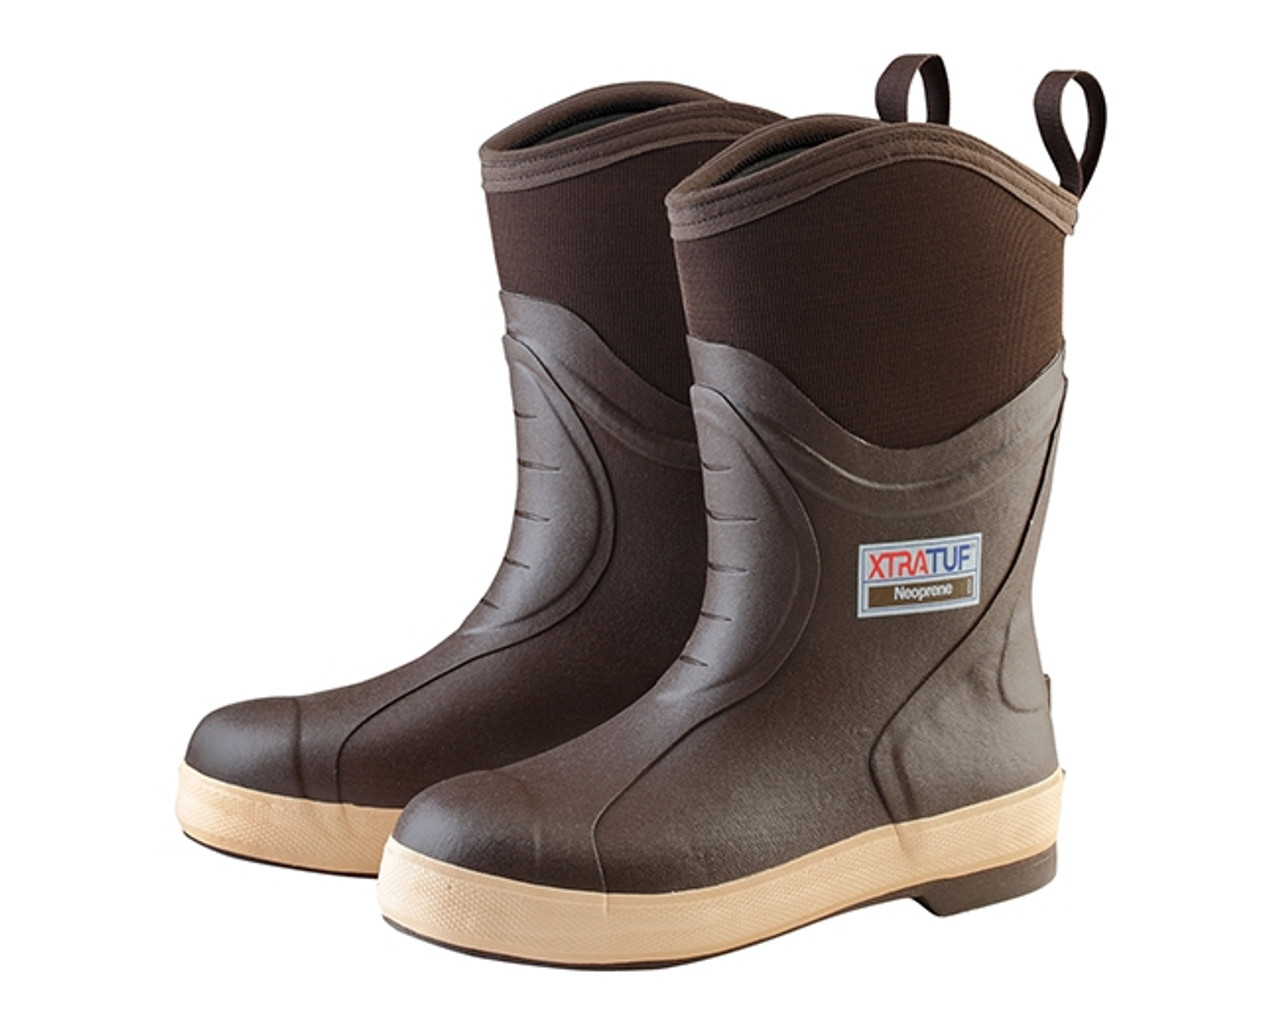 G-Rubber Boots - Gamakatsu - Products